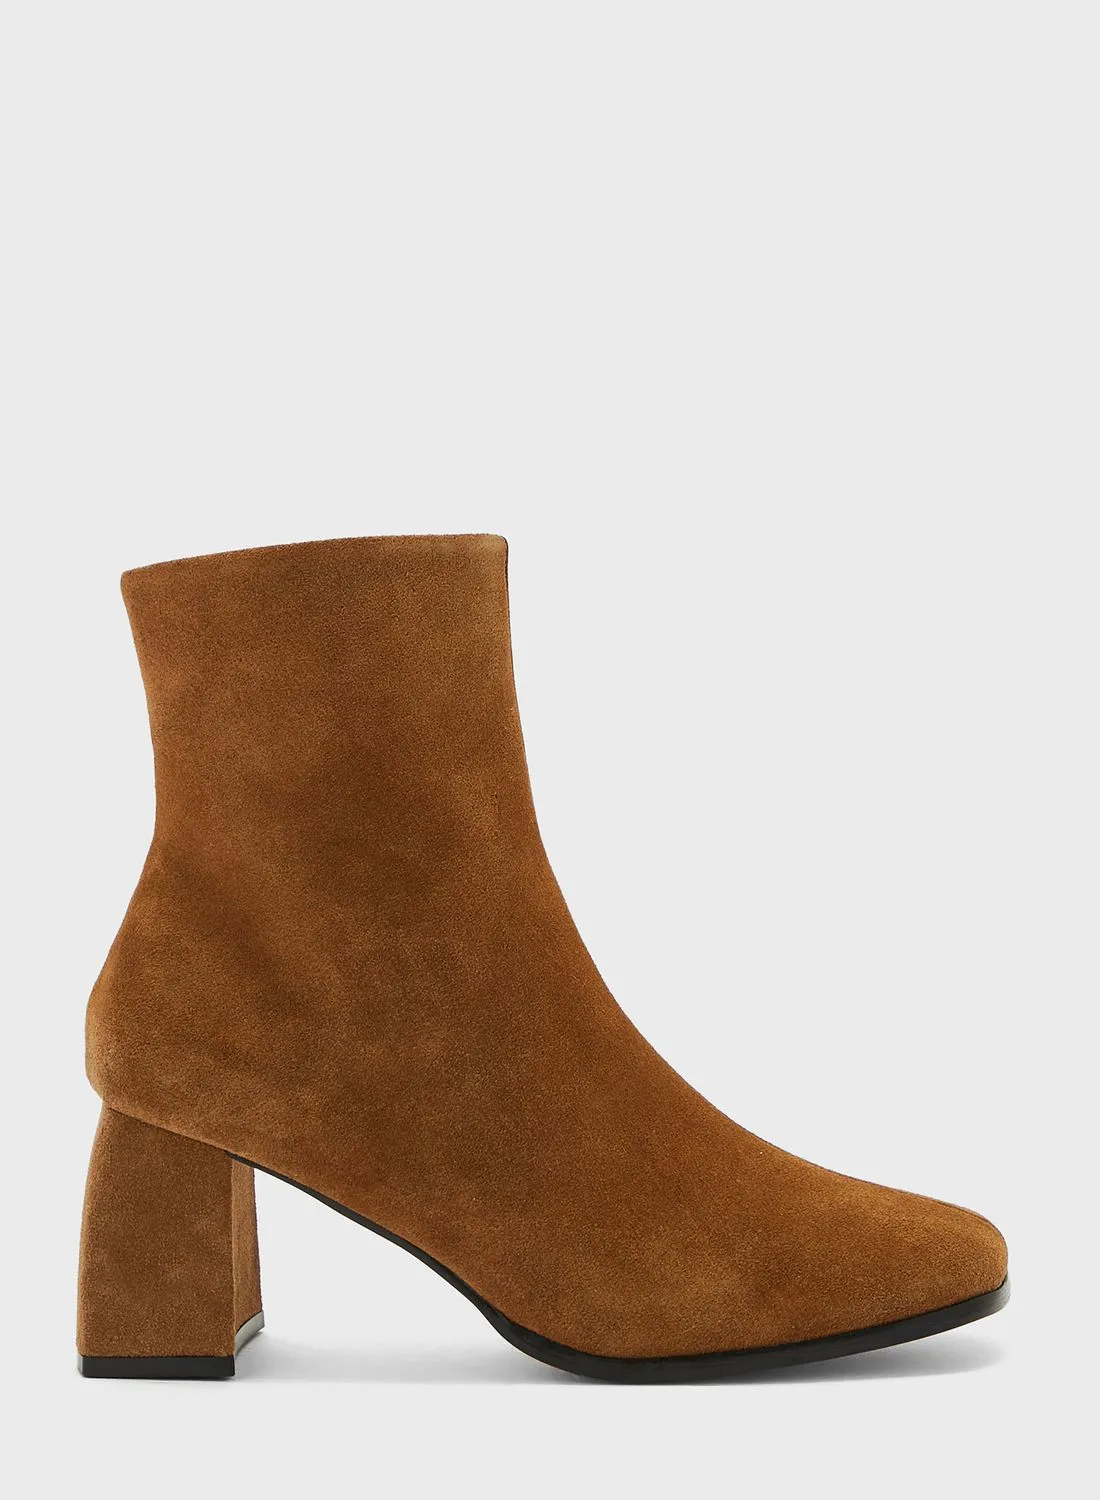 TOPSHOP Nina Flared Ankle Boots